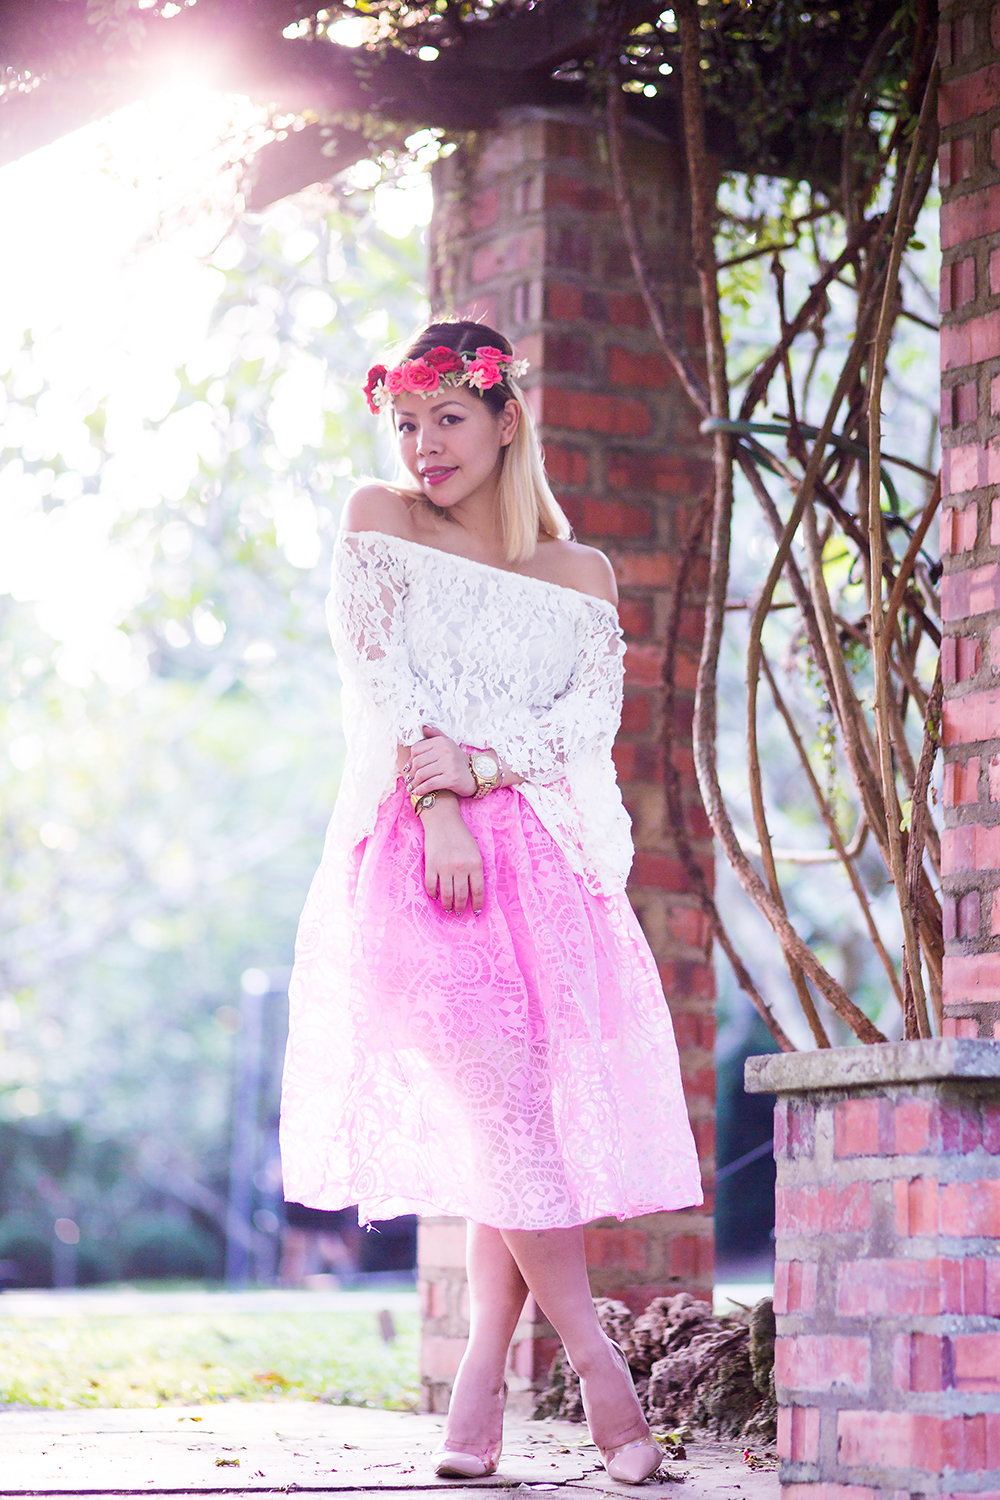 Crystal Phuong- Singapore Fashion Blog- Sweet look with chiffon midi skirt, off shoulder lace top and floral crown